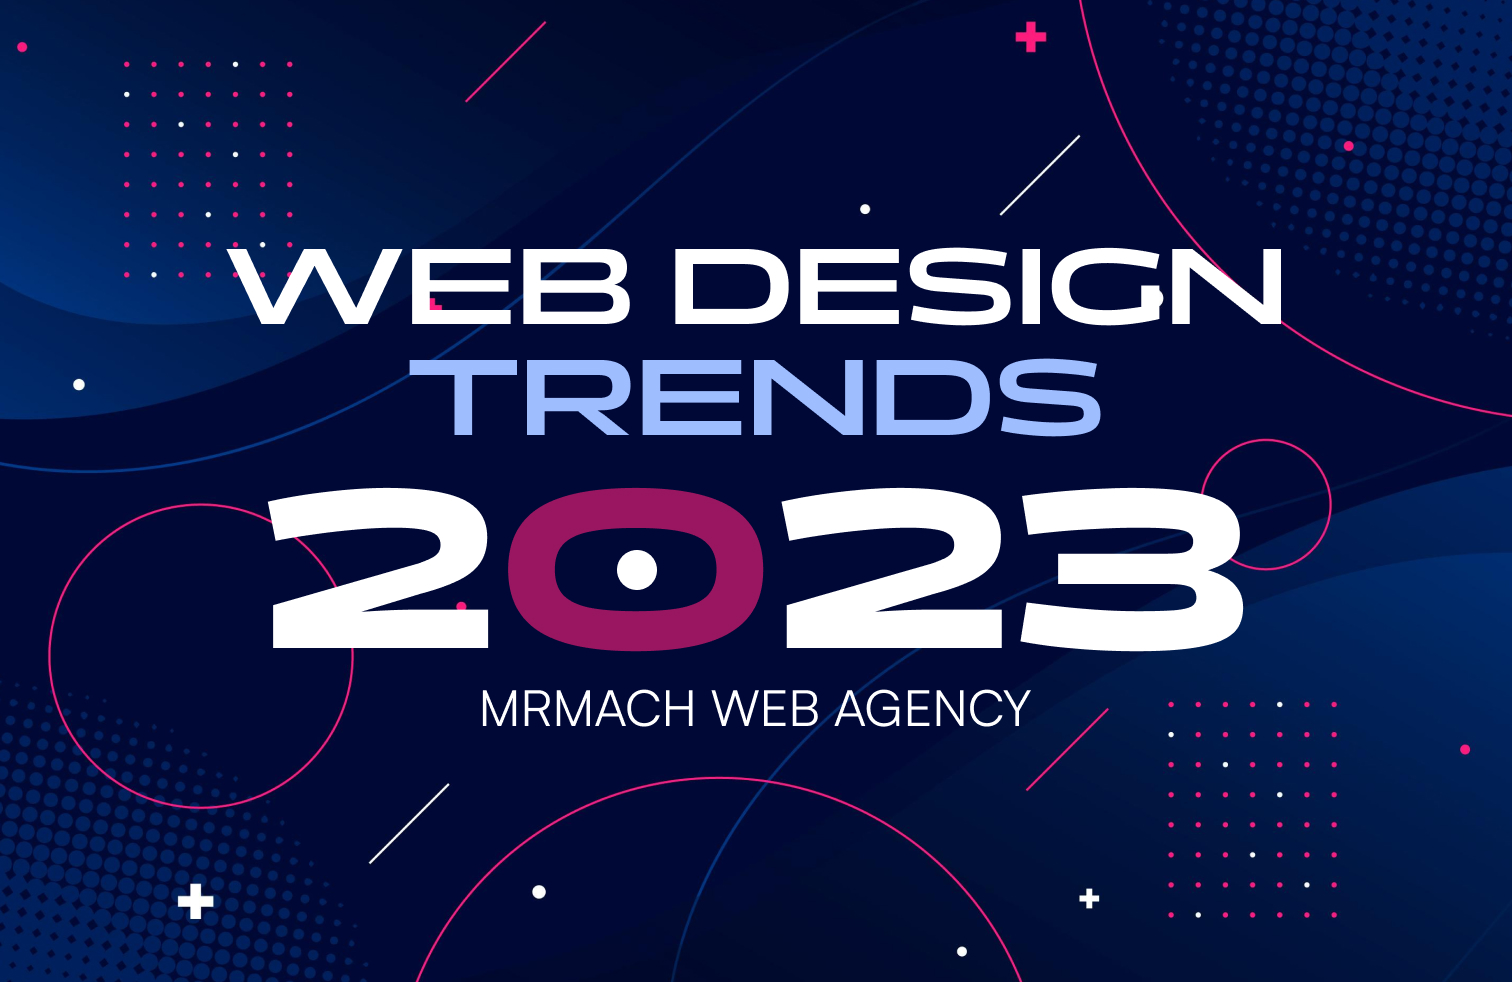 Top 5 Web Design Trends for 2023 that you should follow